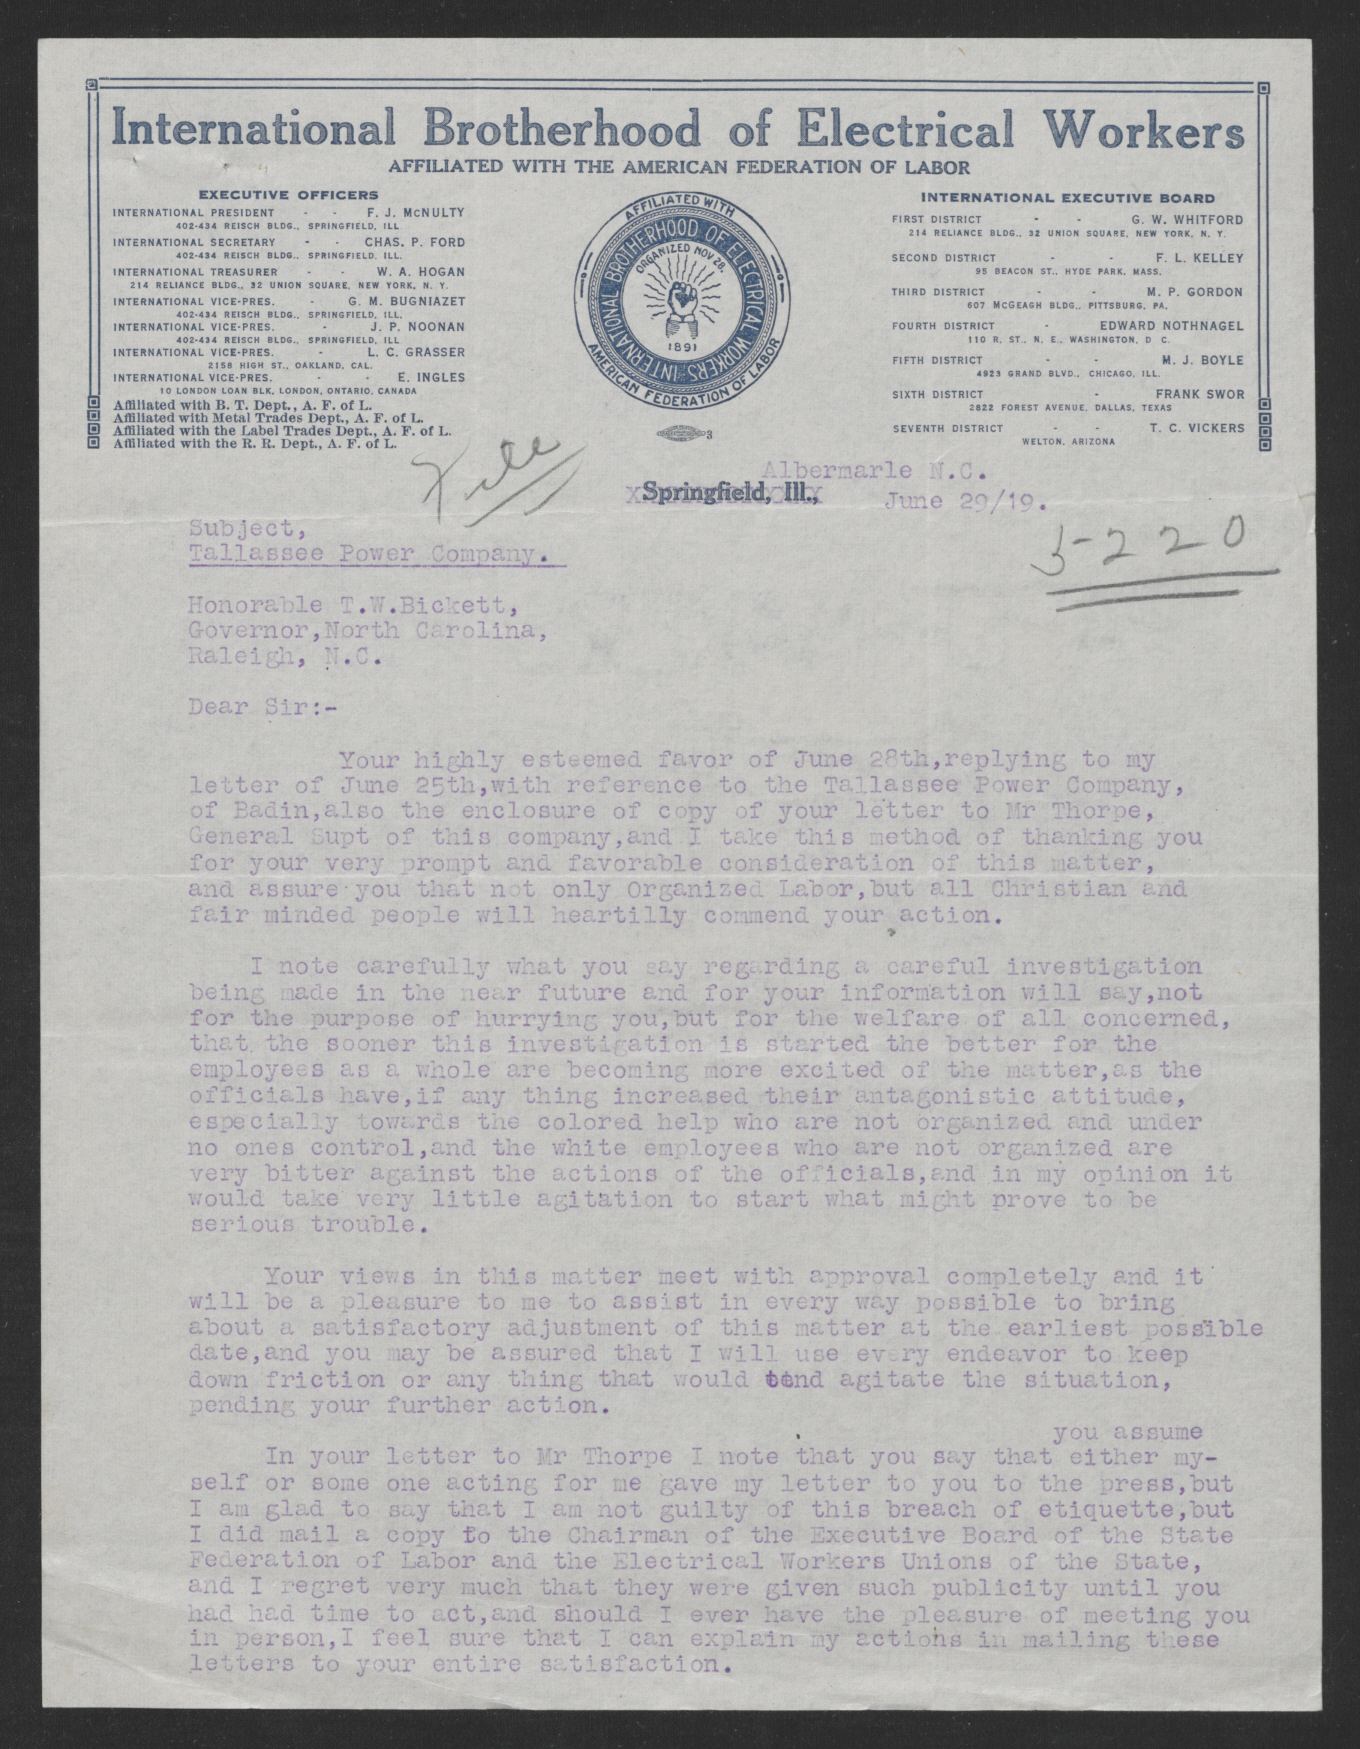 Letter from David L. Goble to Thomas W. Bickett, June 29, 1919, page 1